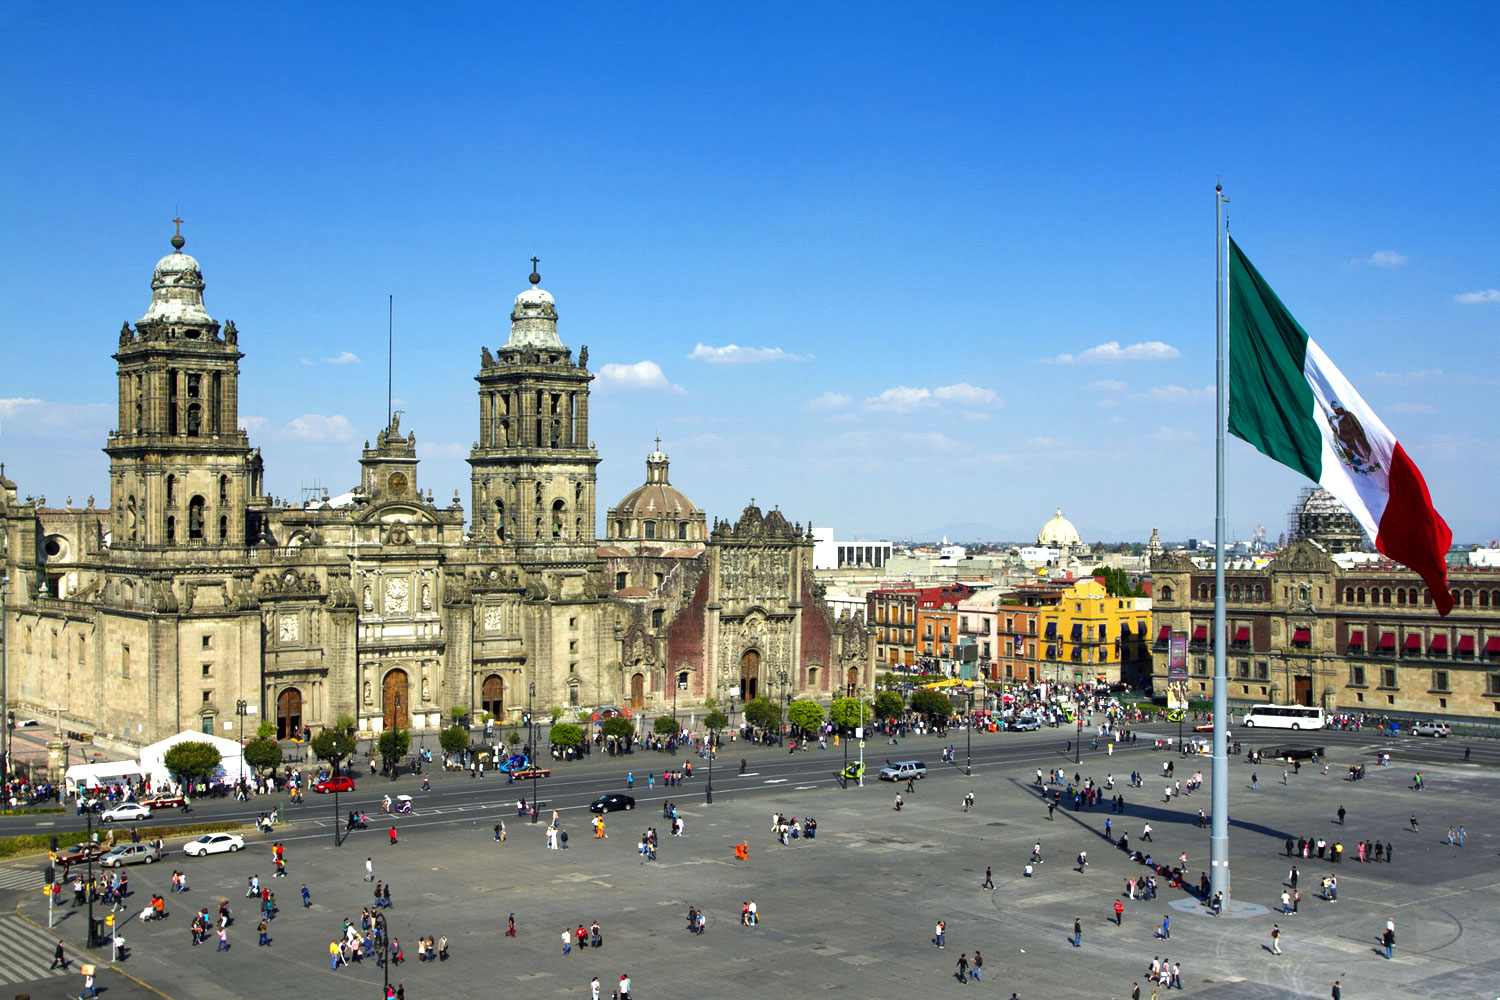 The Ultimate 13 day Mexico and Guatemala Multi-Day Tour | Group Discount Rate $2699.00 US dollars per person